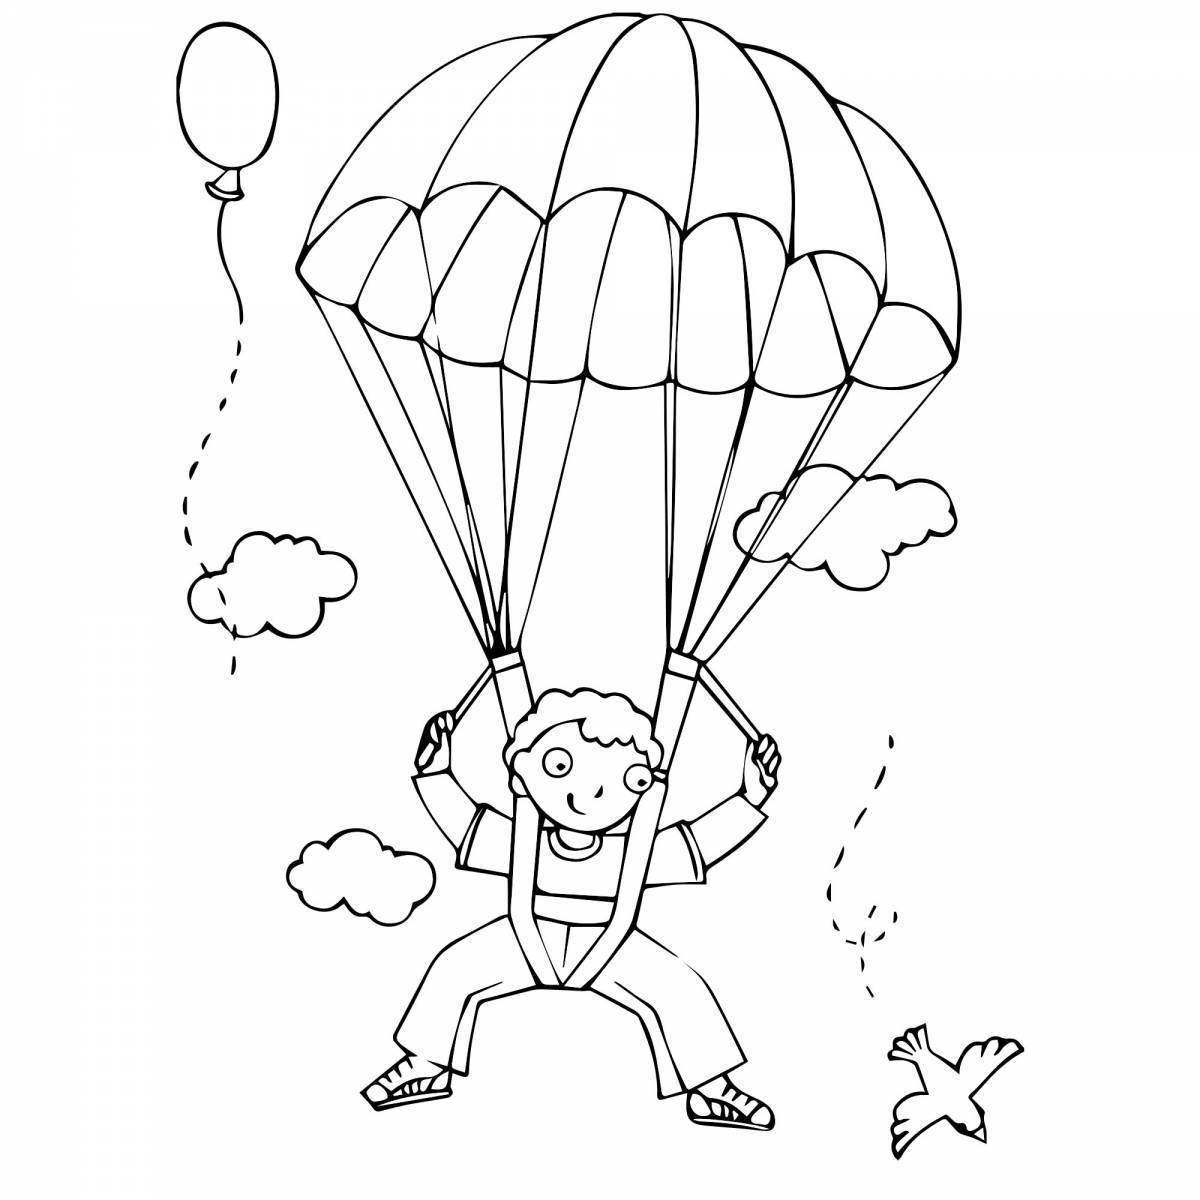 Courageous skydiver coloring page